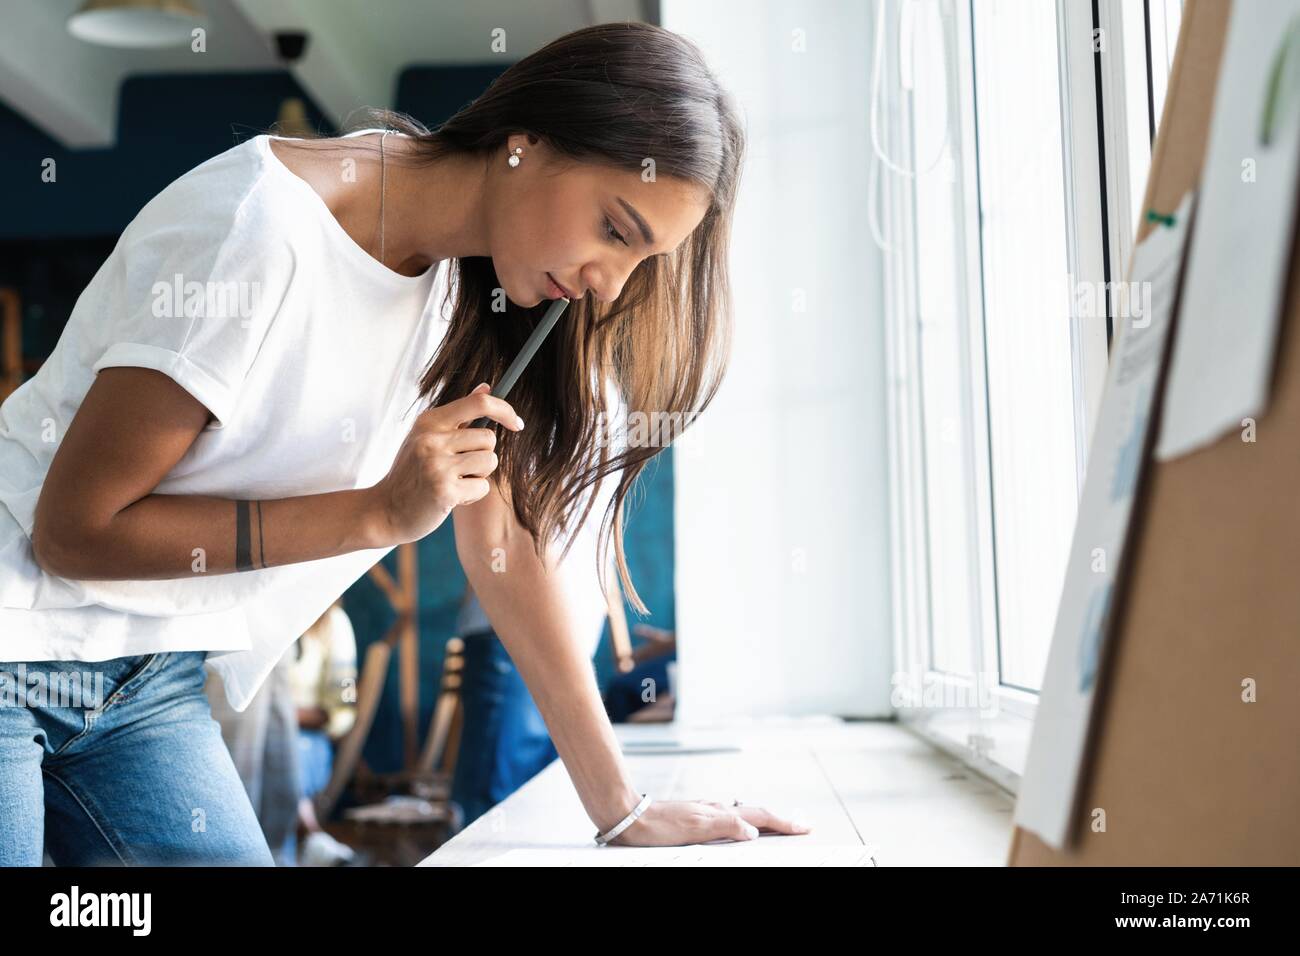 Portrait of young female architect working on project. Stock Photo